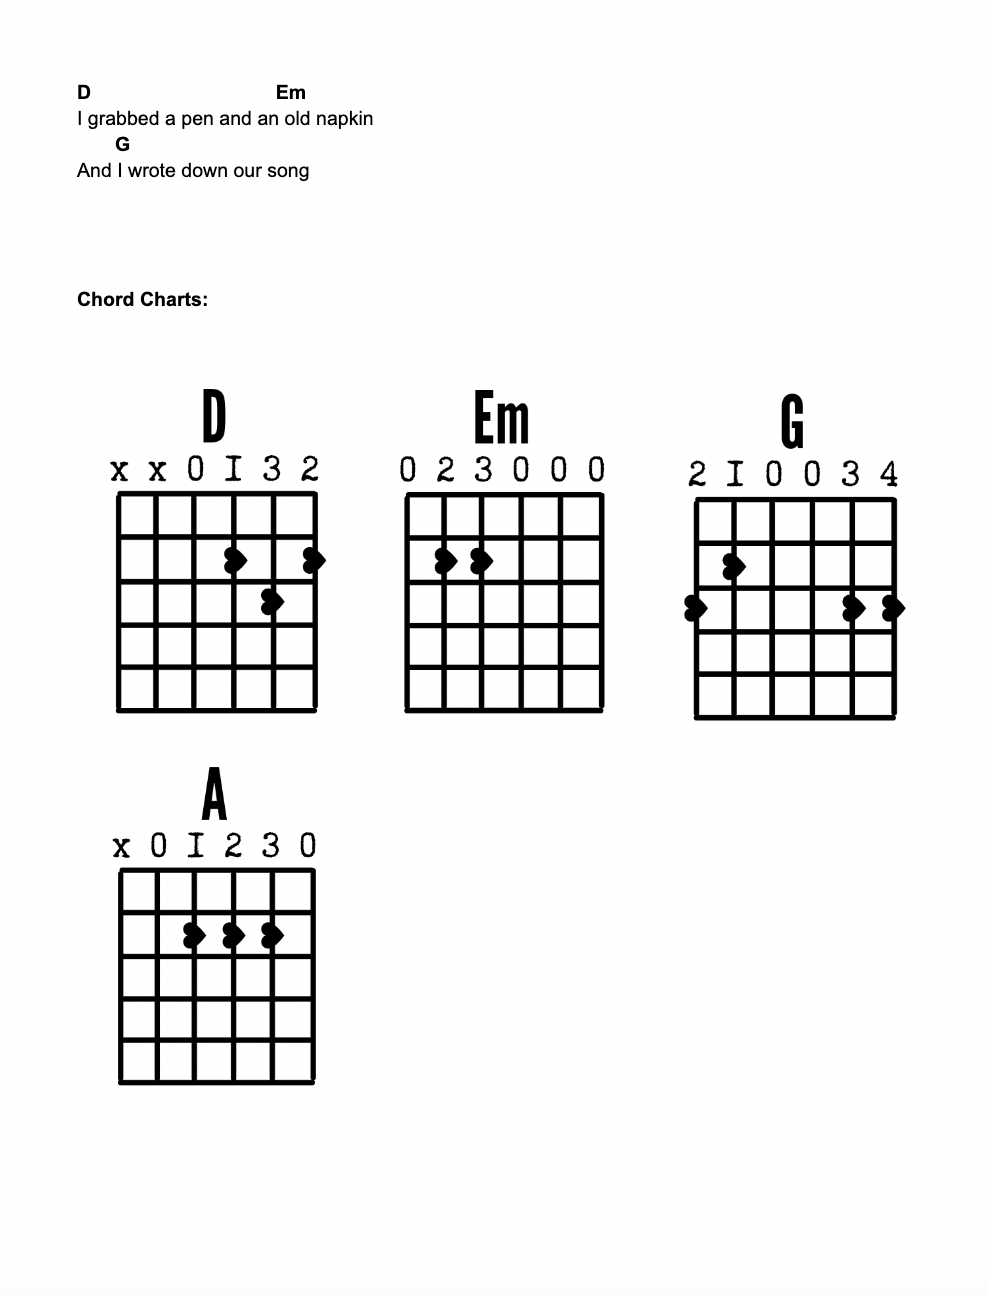 guitar notes for songs taylor swift